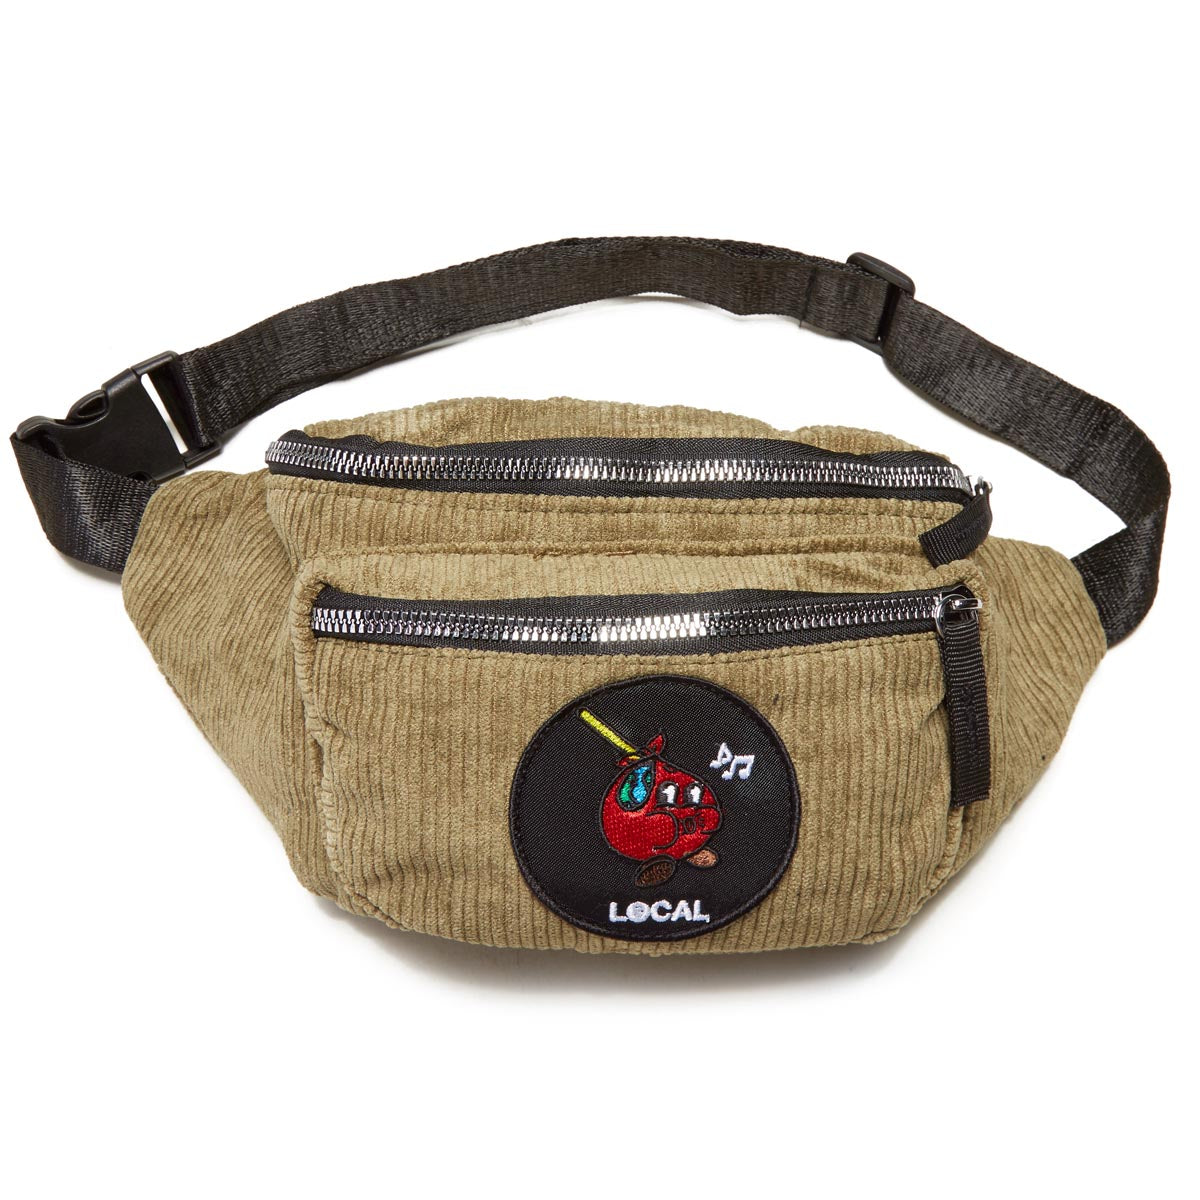 Less Than Local Bindle Bag - Olive image 1